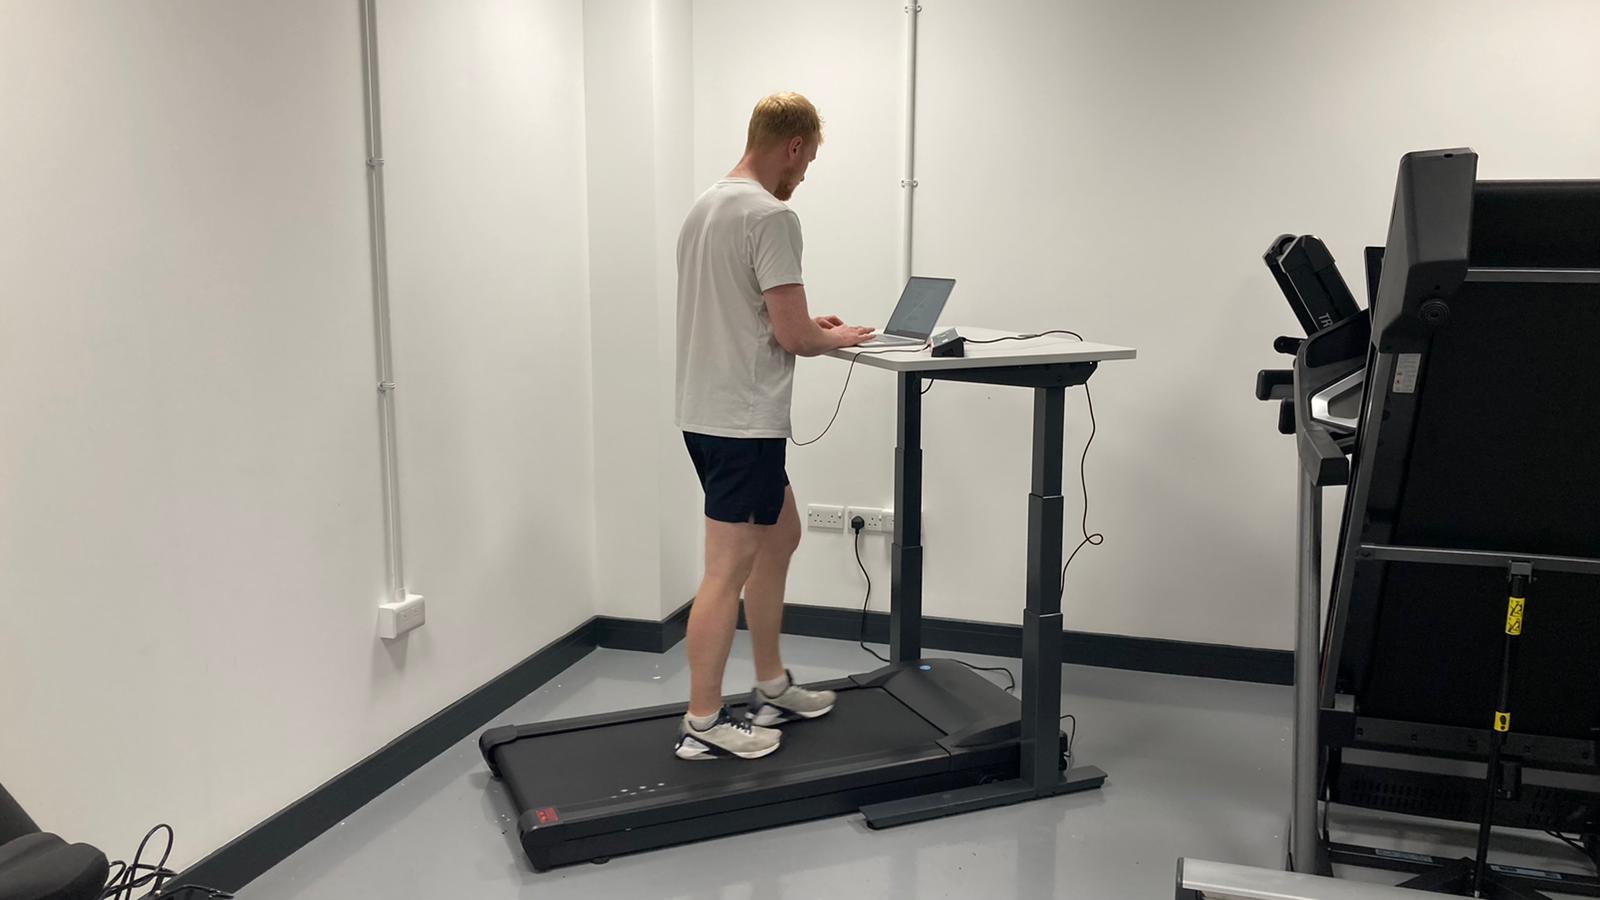 Live Science fitness writer, Harry Bullmore, tries out the Lifespan TR1200B in a purpose-built testing centre